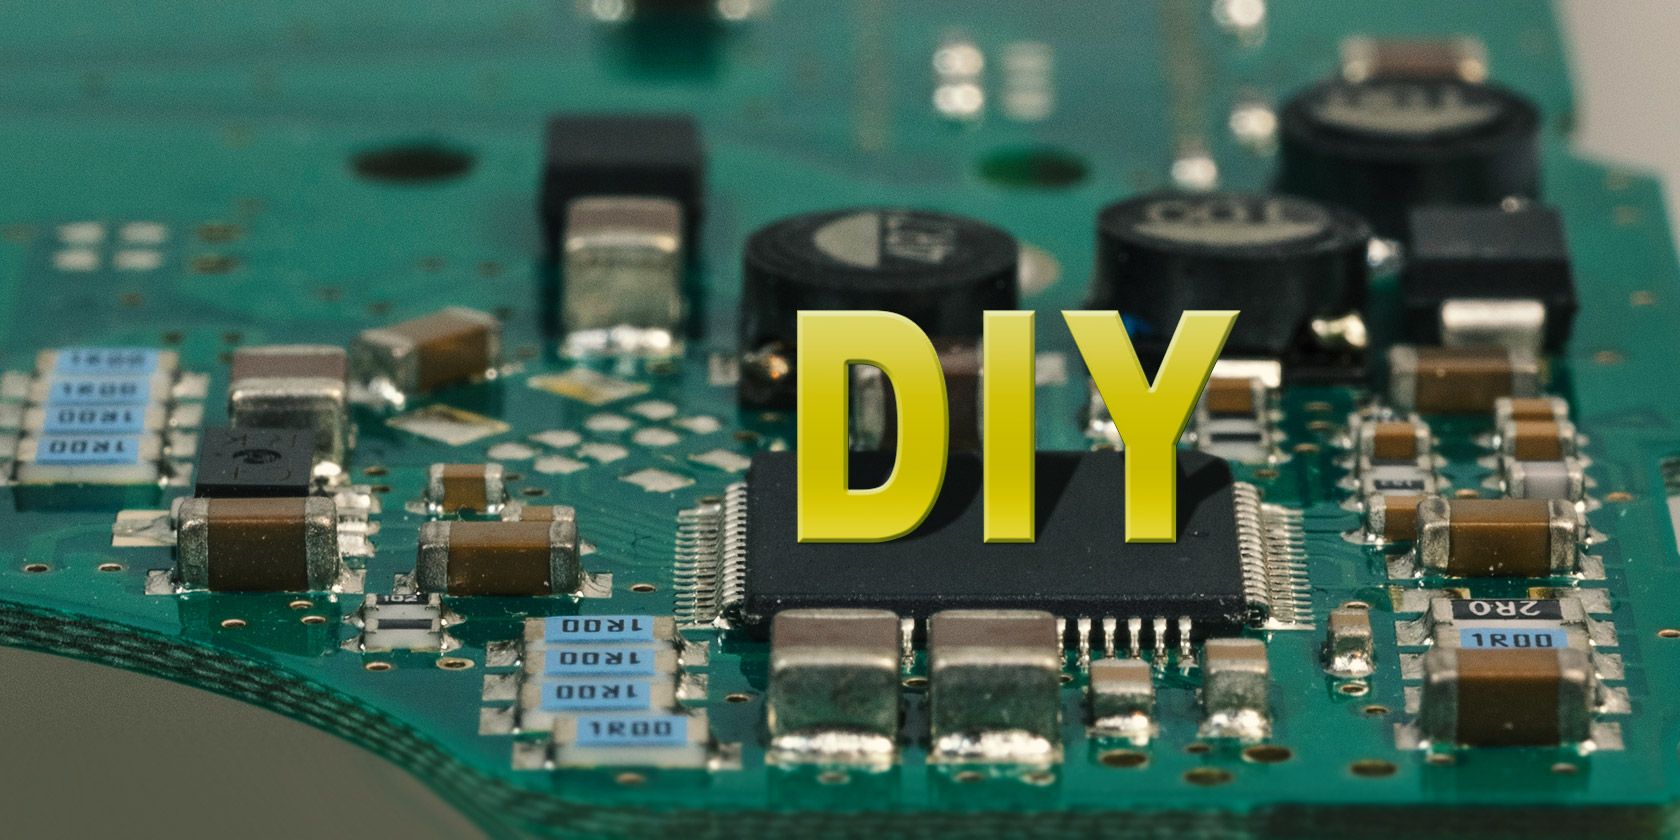 Diy electronic projects for beginners